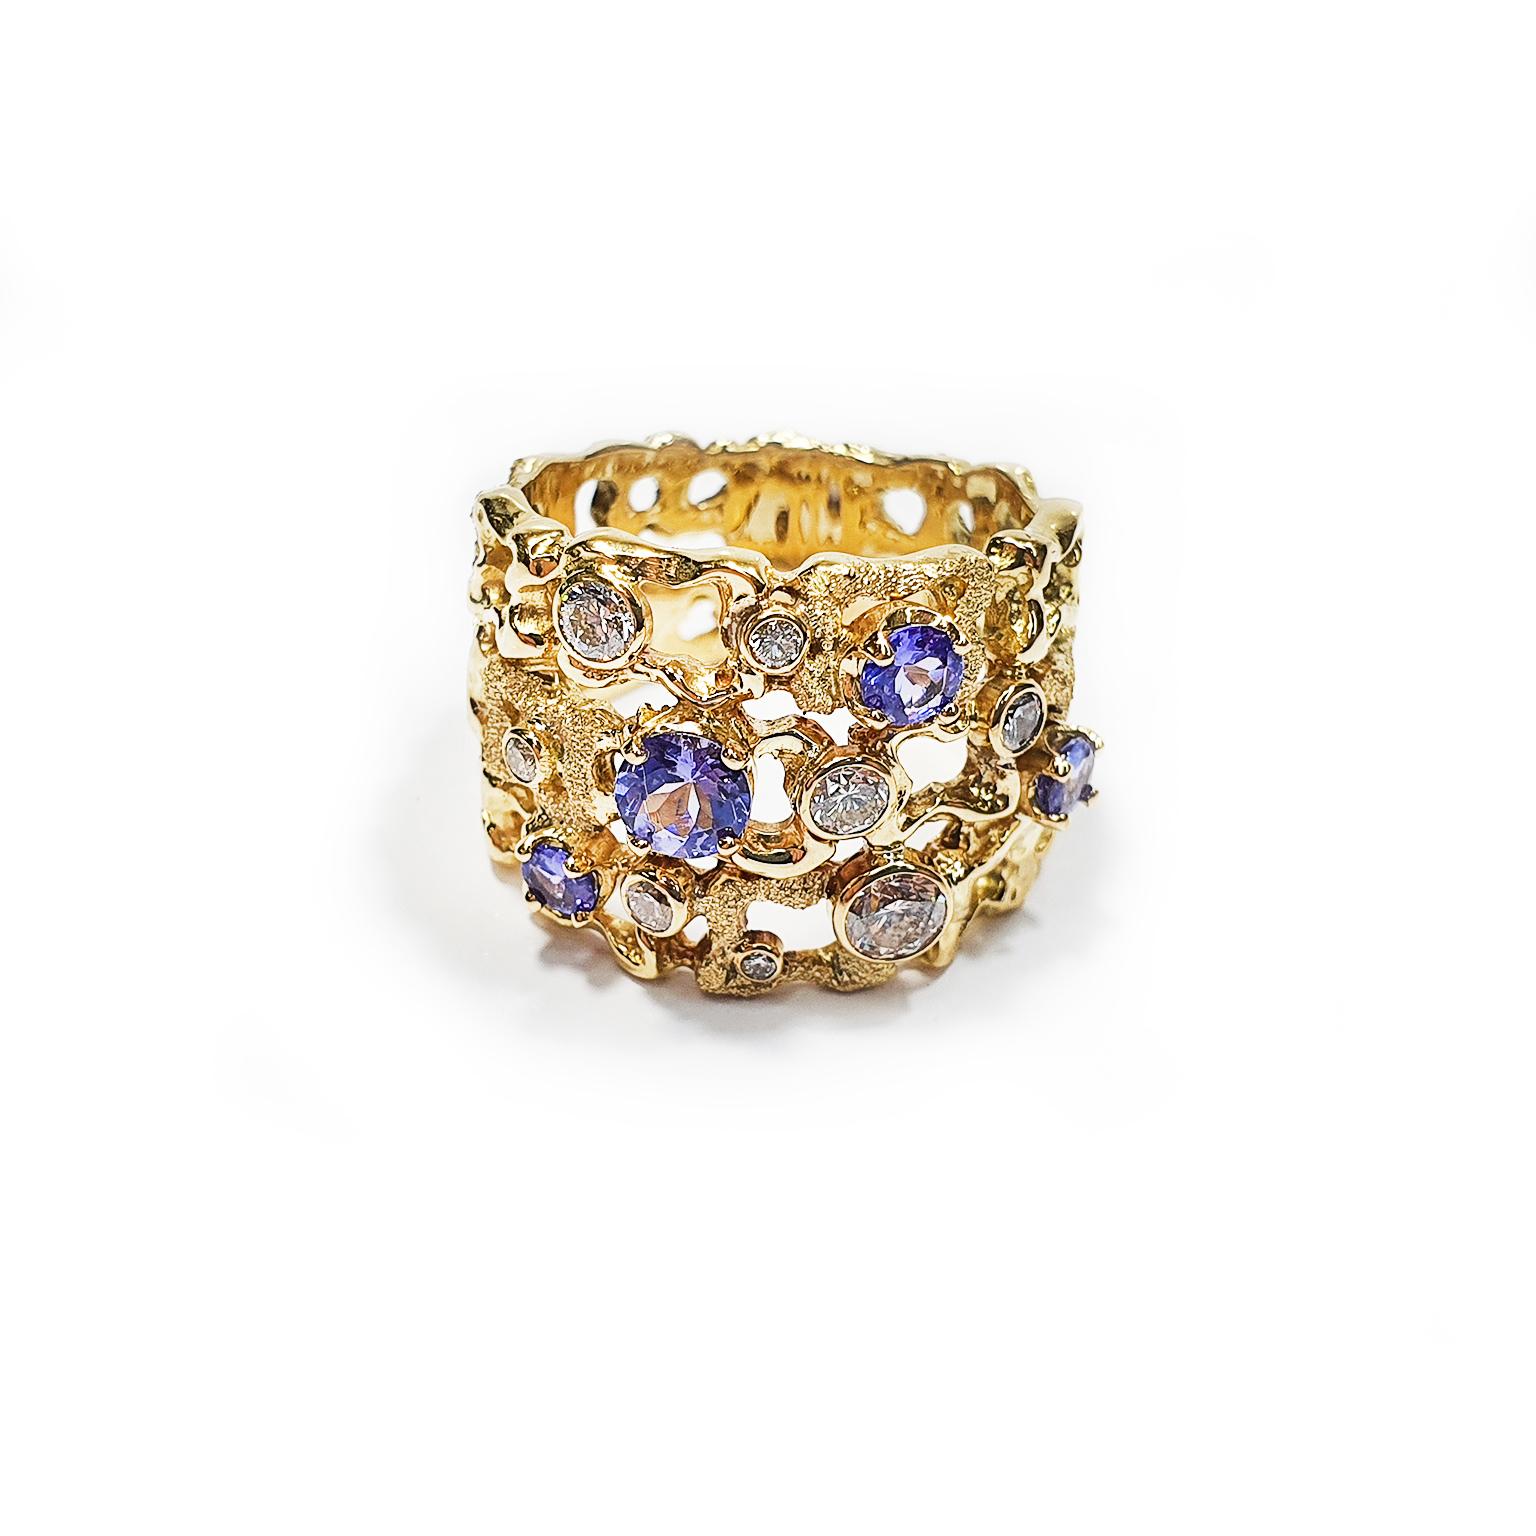 Paul Amey 18k Gold, Diamond and Tanzanite Dress Ring In New Condition For Sale In Tewantin, Queensland